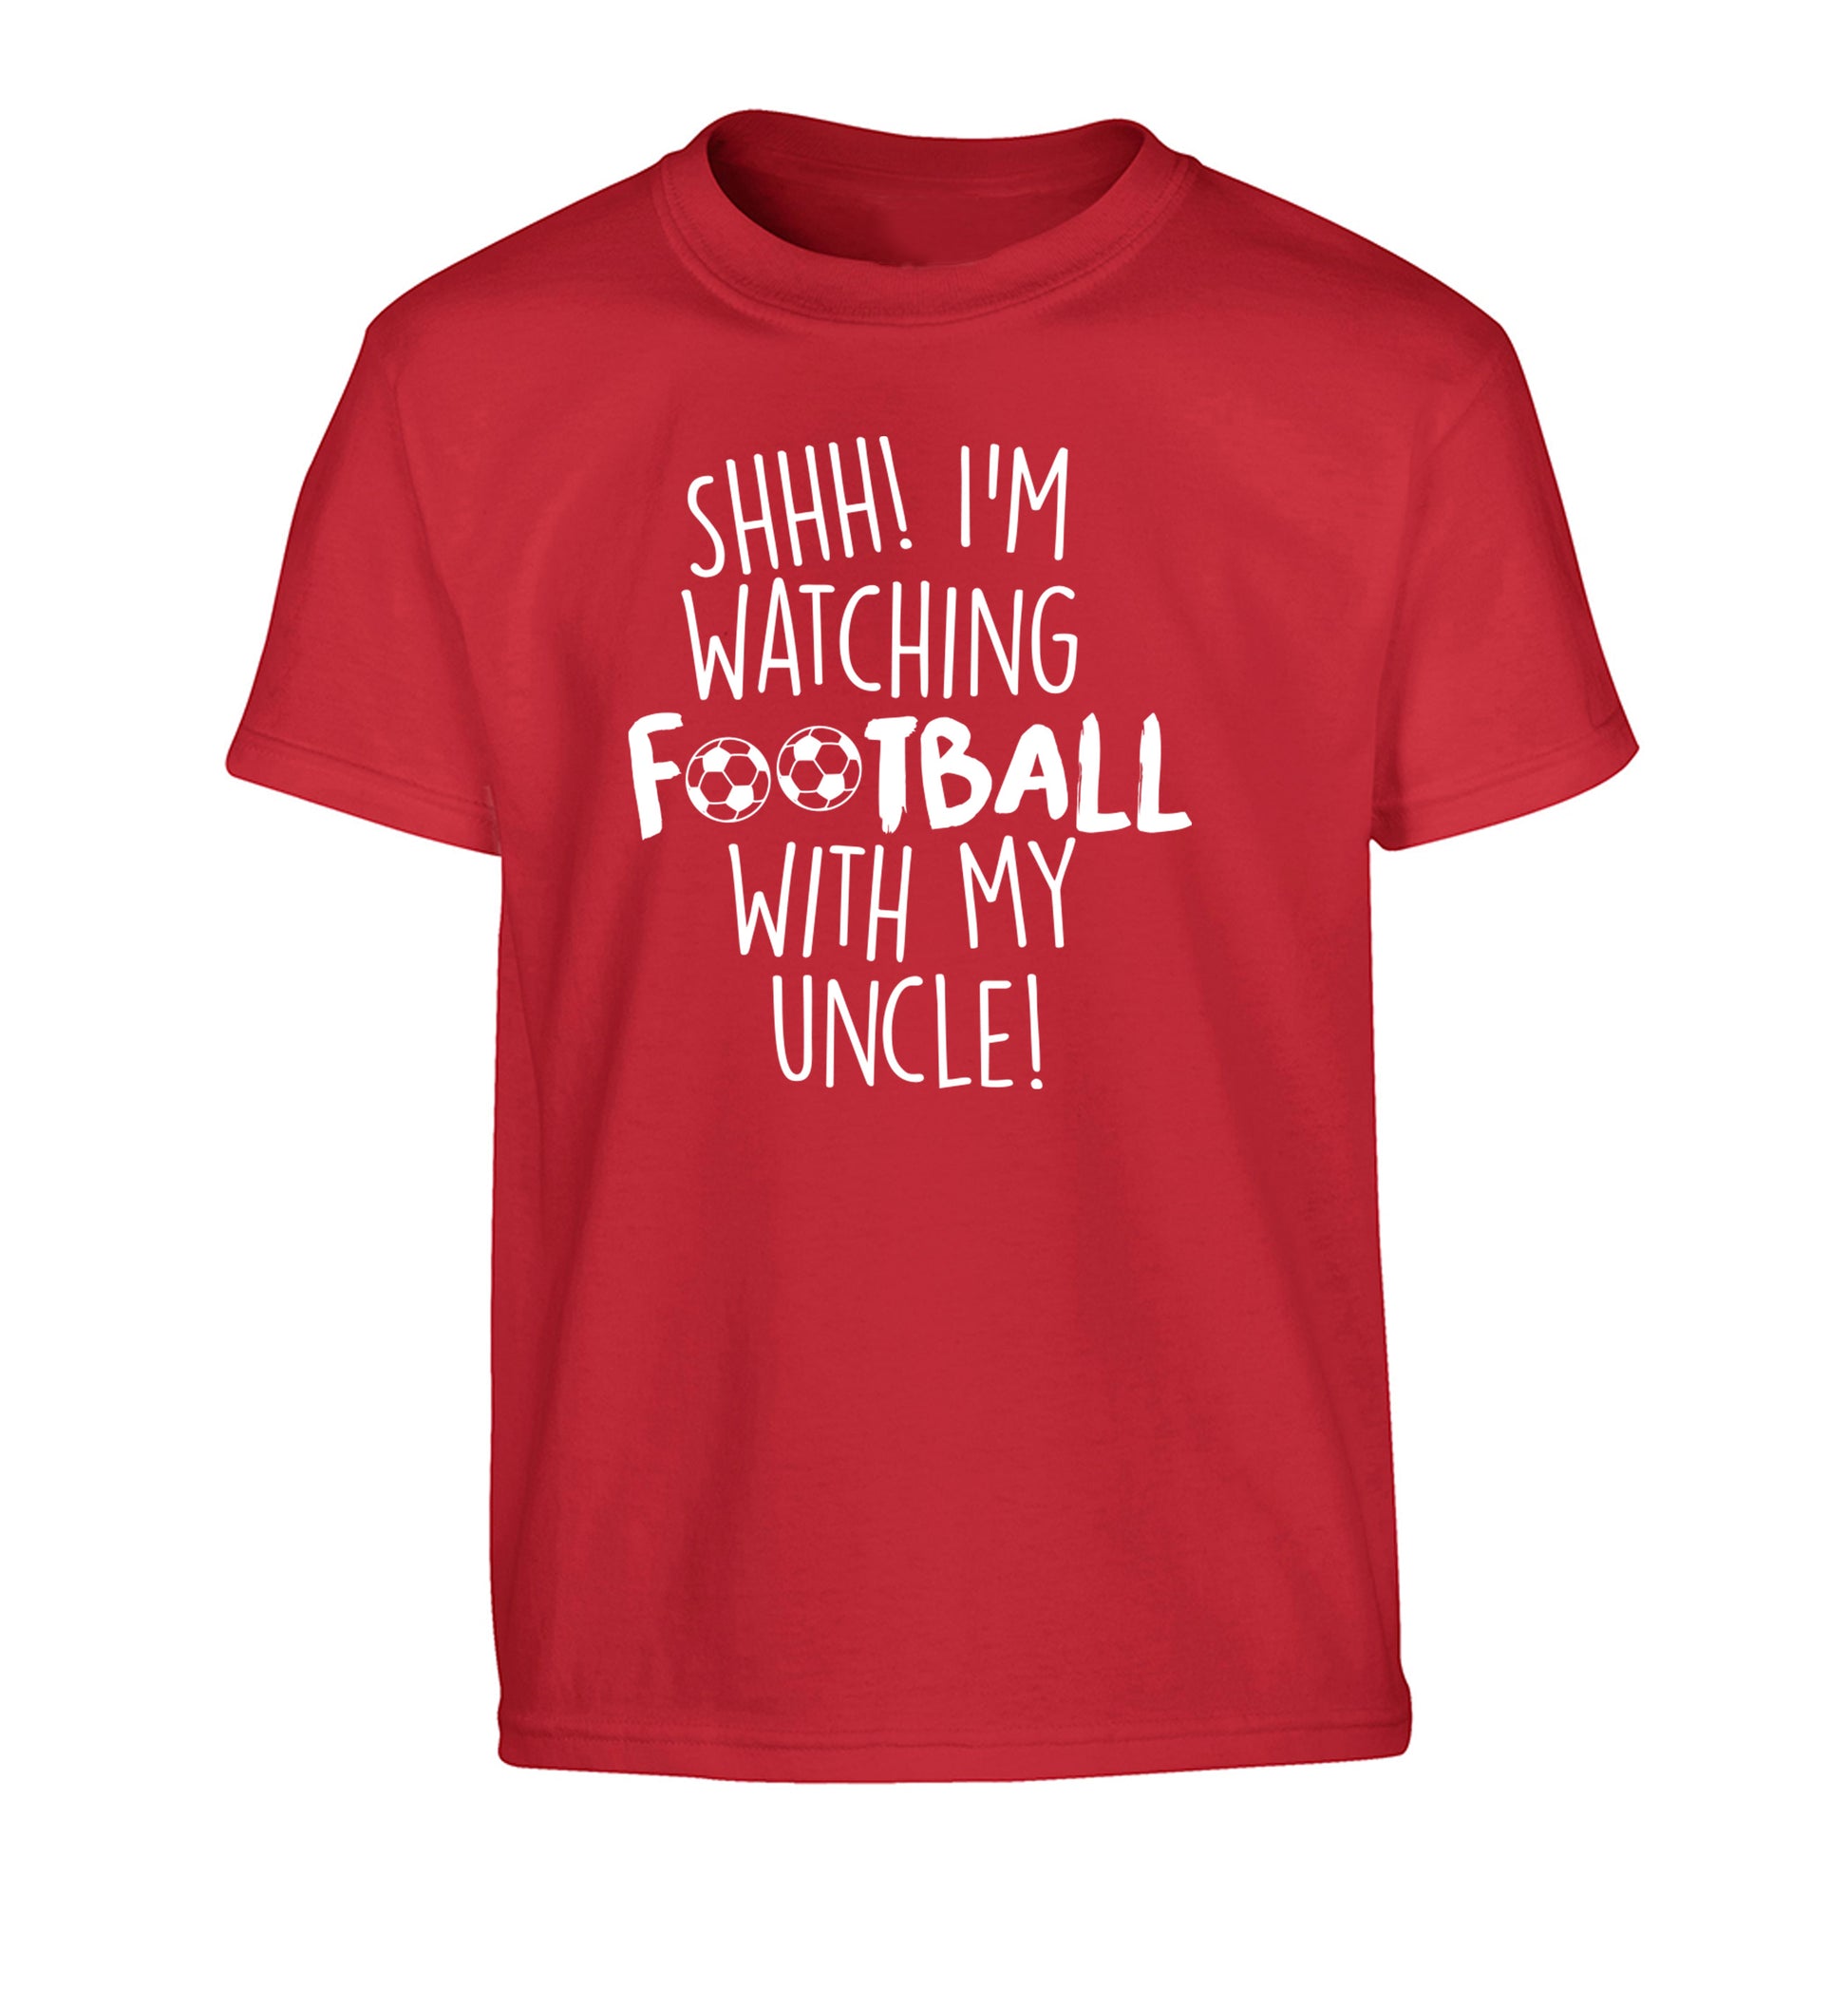 Shhh I'm watching football with my uncle Children's red Tshirt 12-14 Years